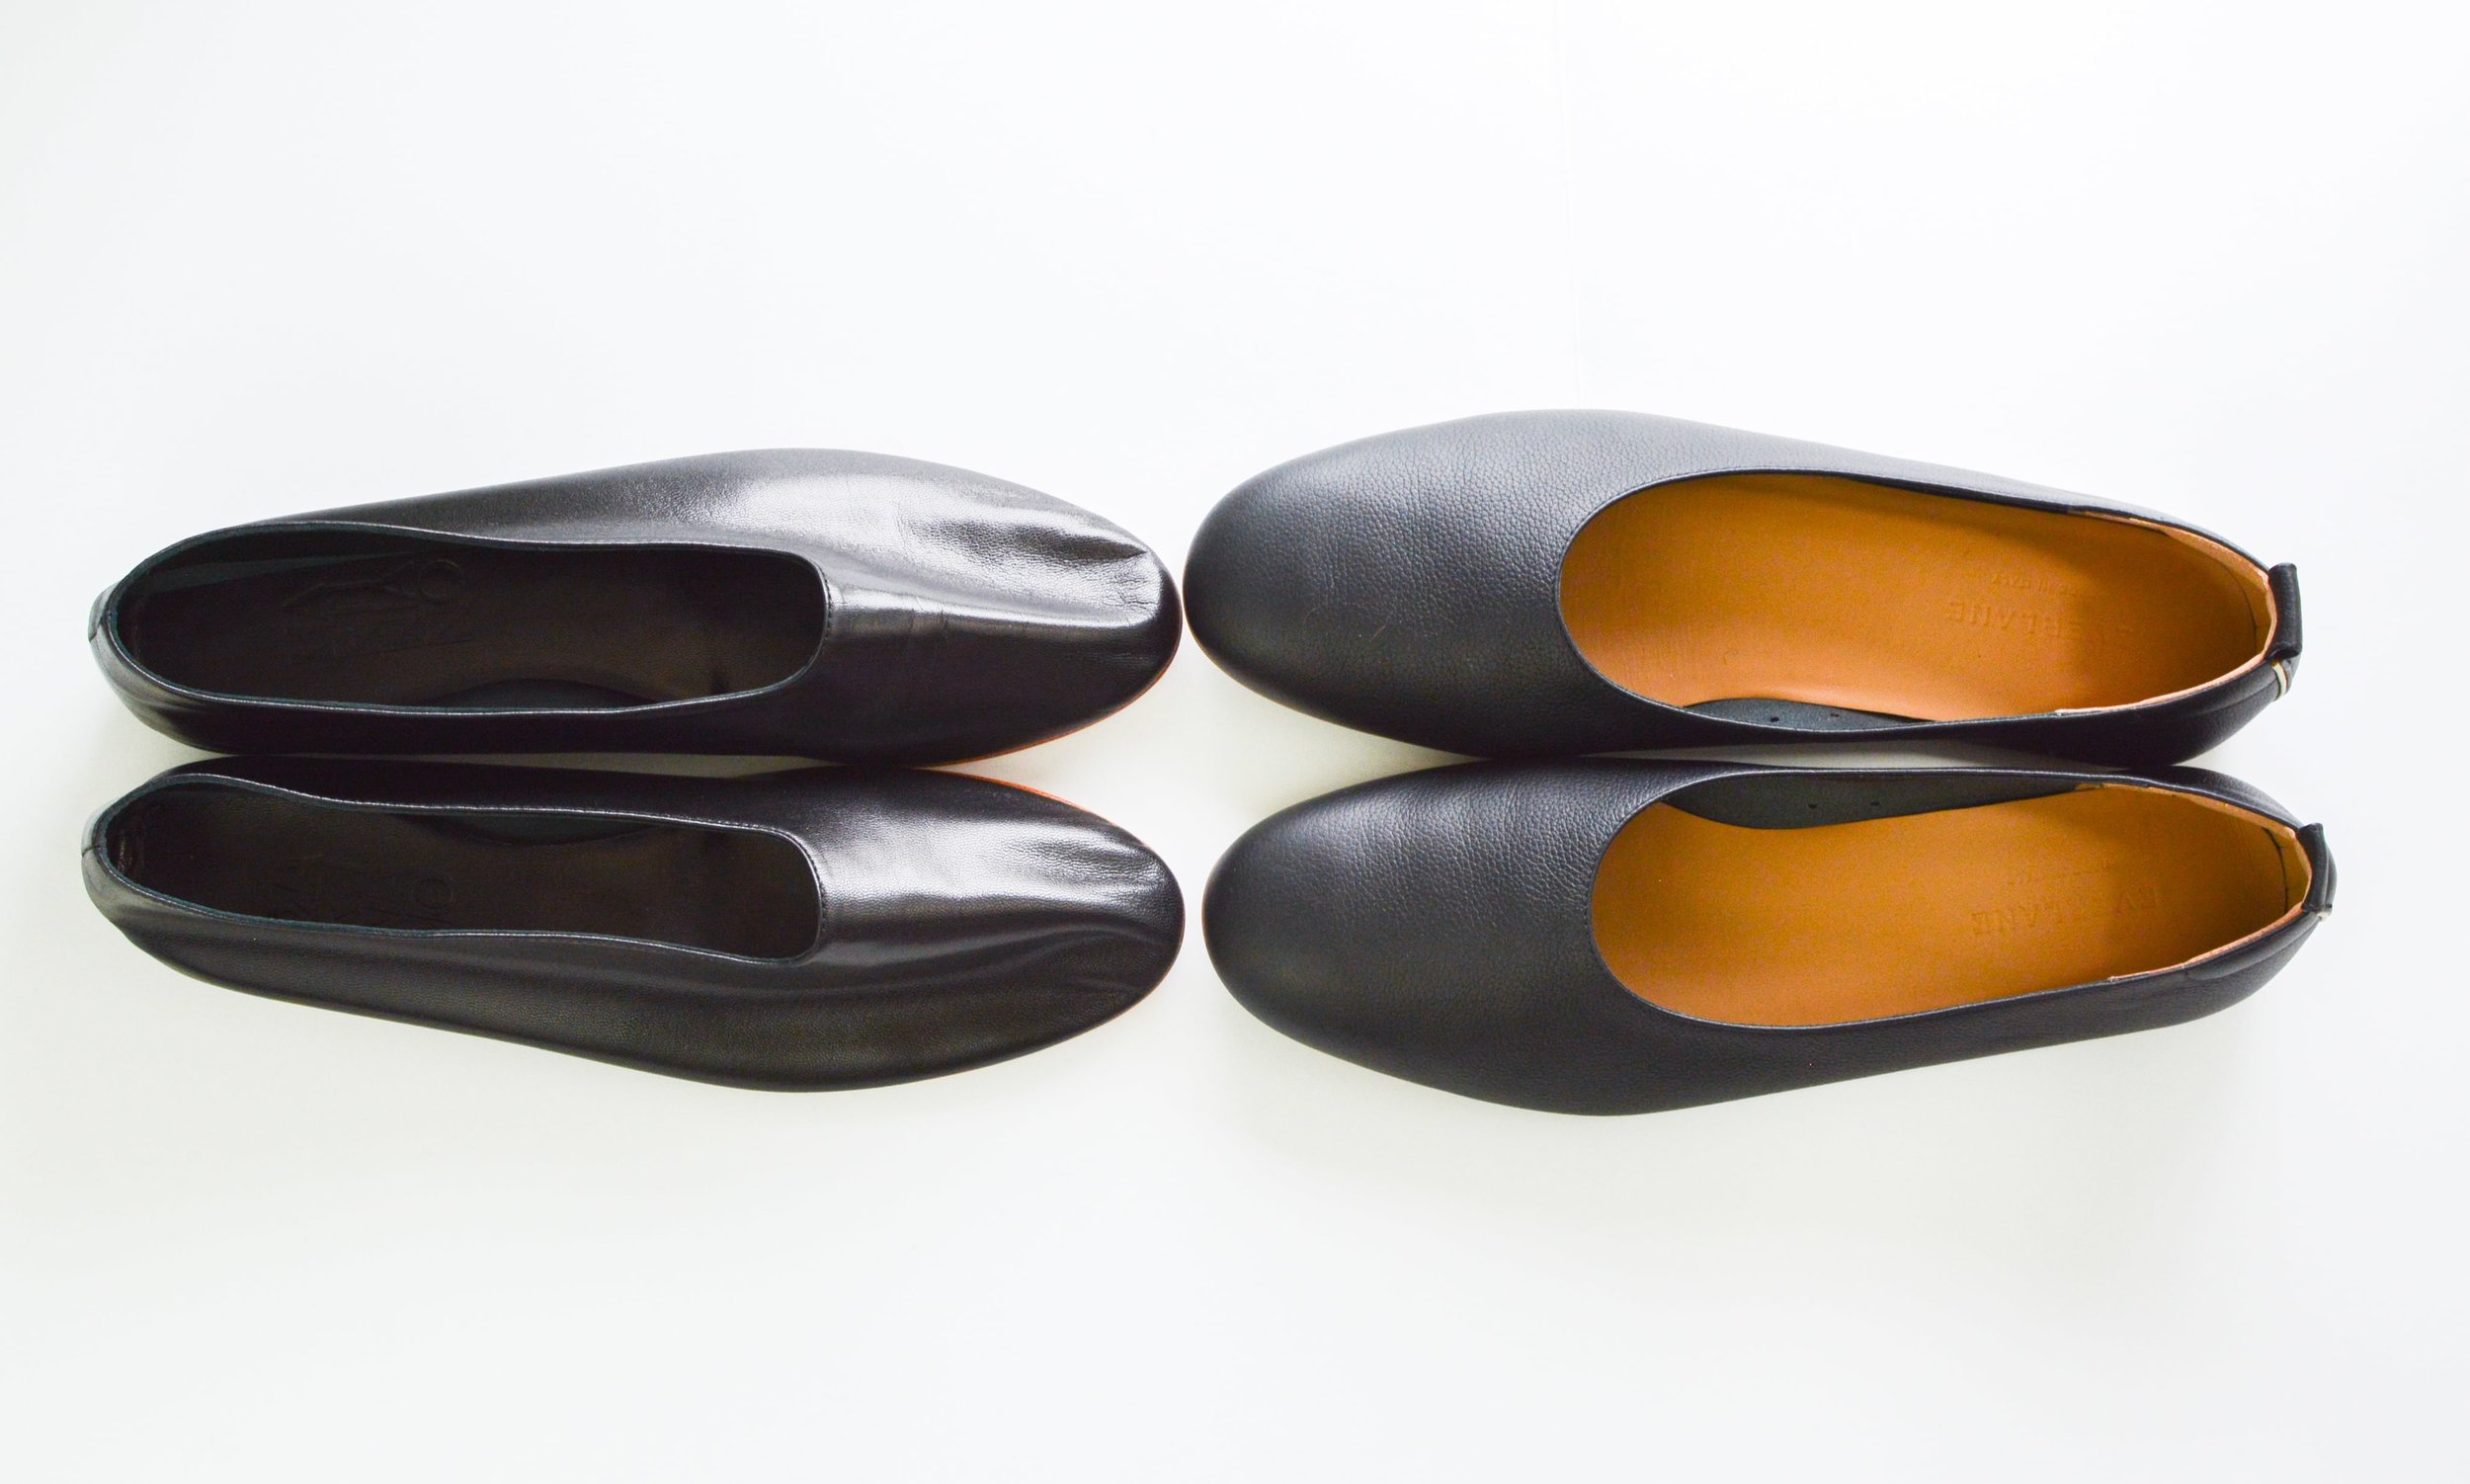 Martiniano Glove Shoe Review vs. Everlane's Day Glove — Fairly Curated